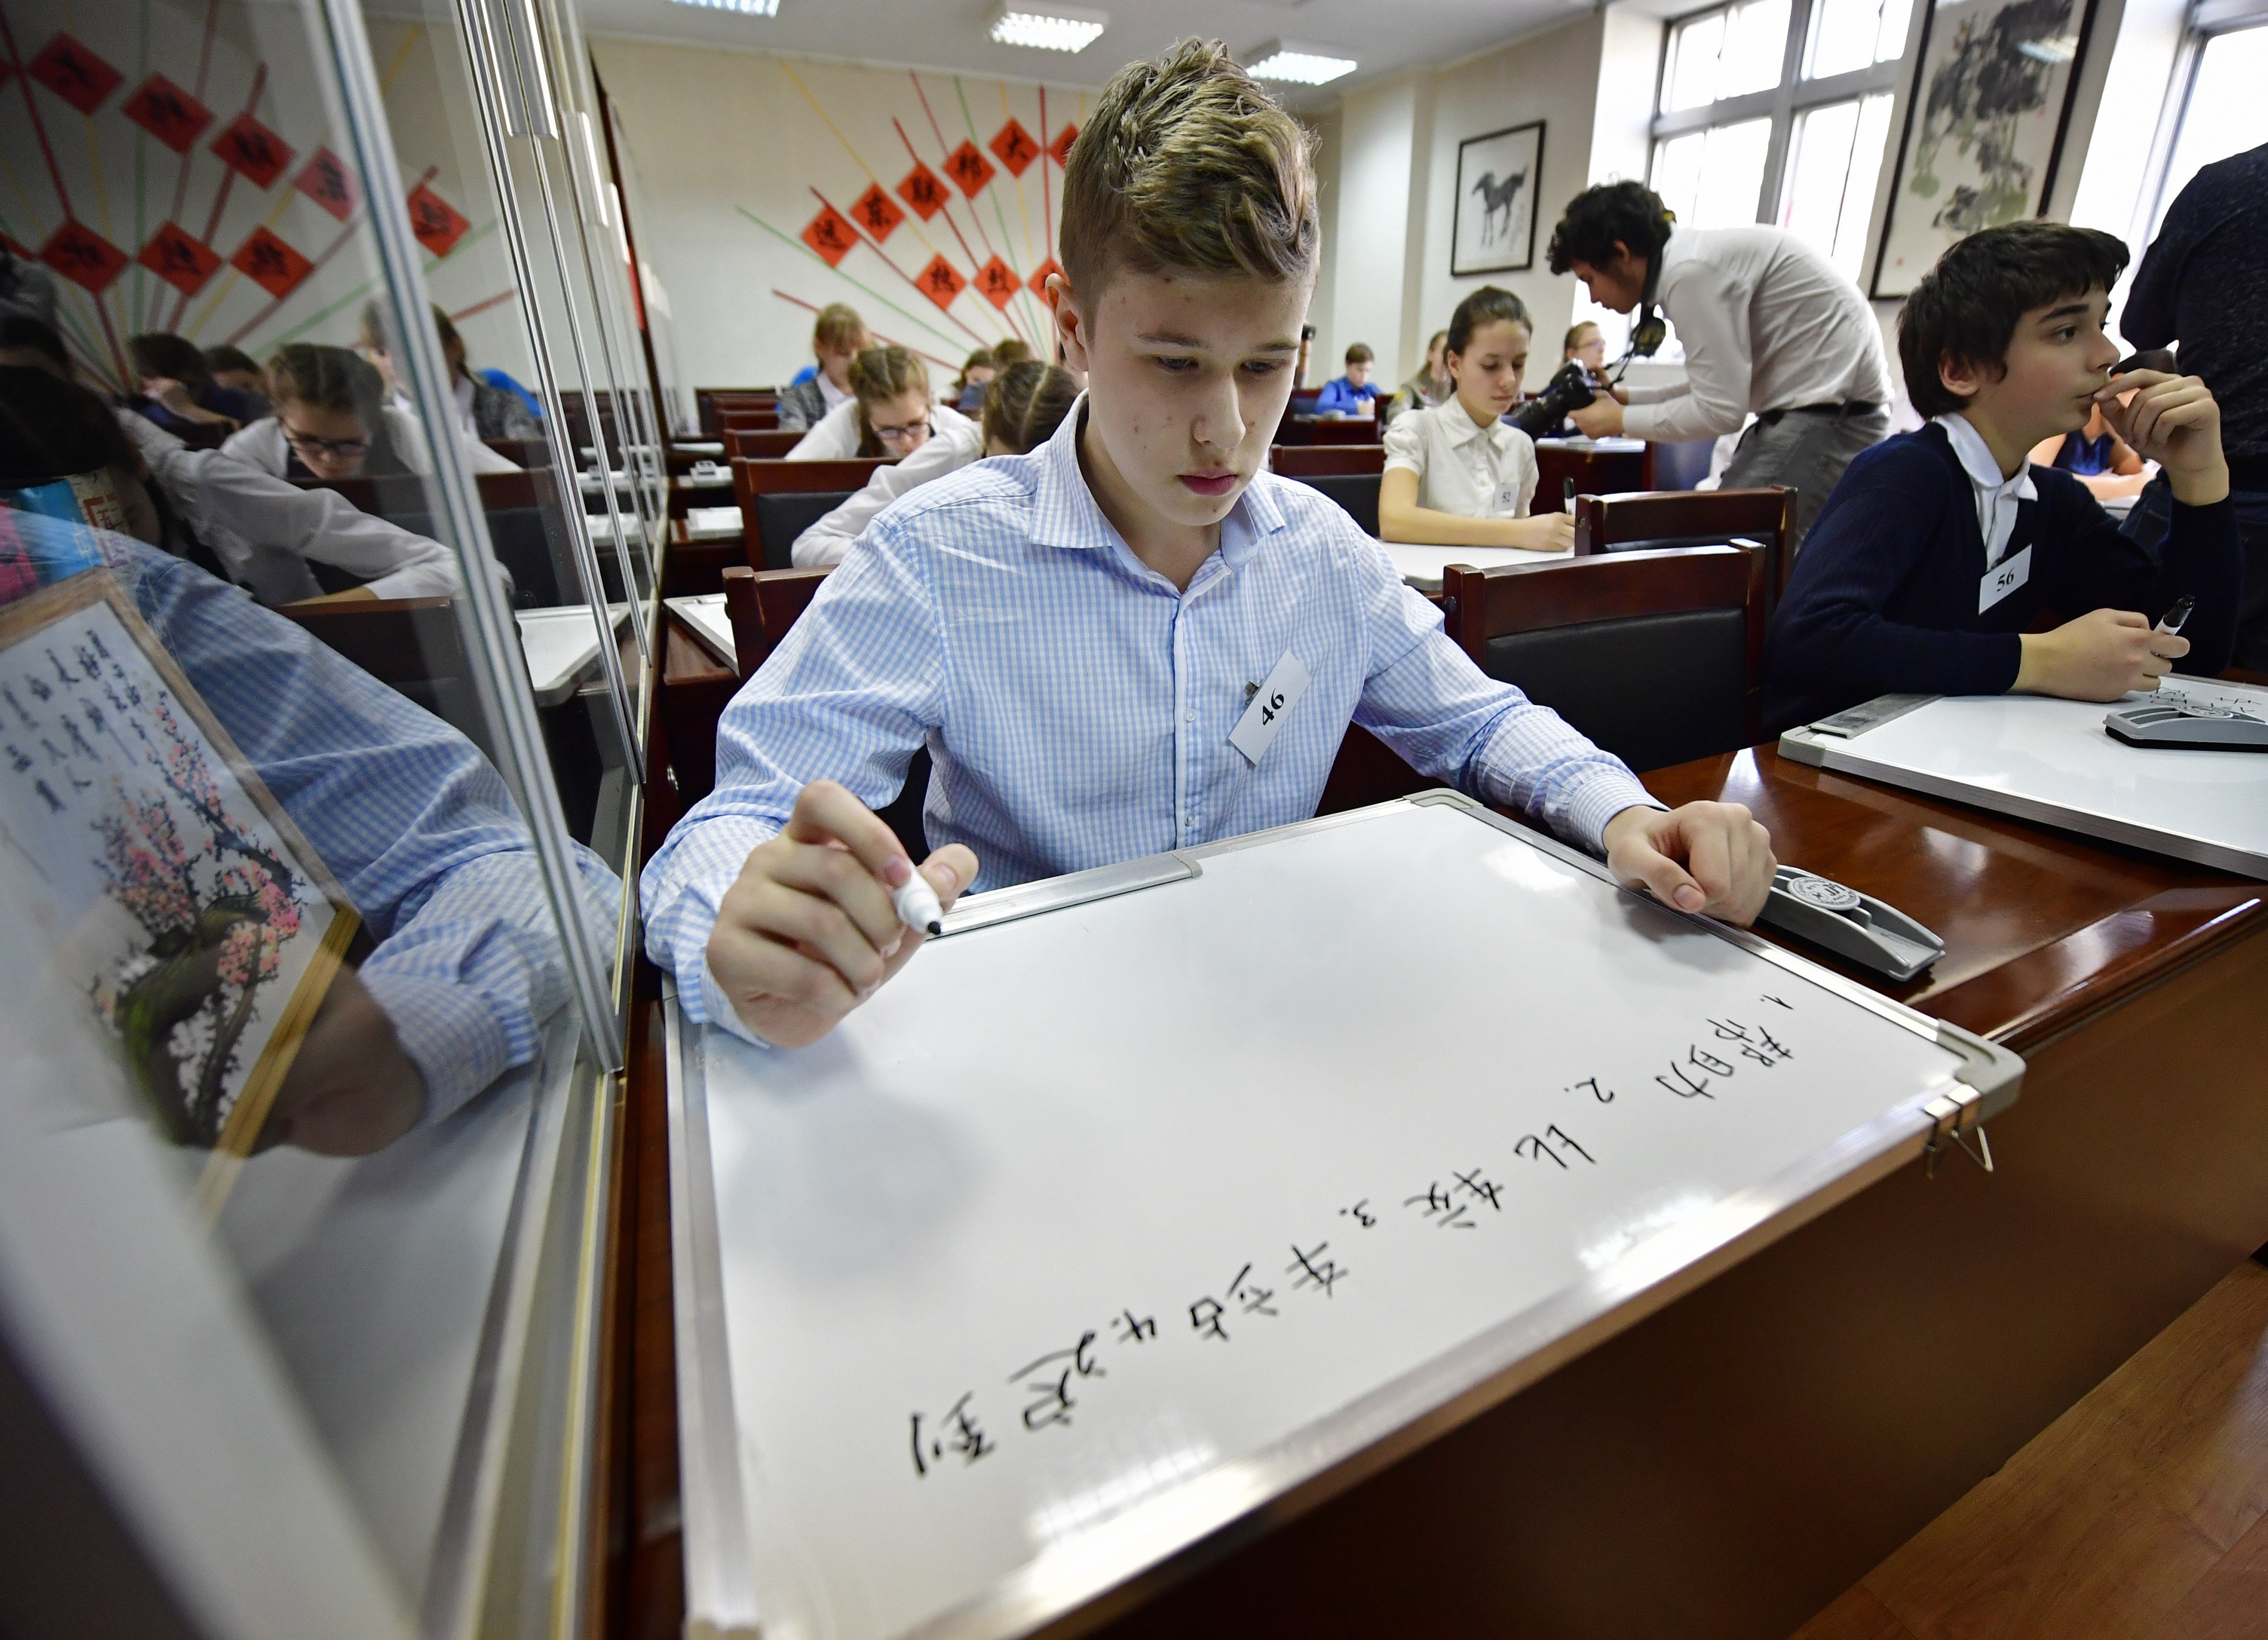 Students write Chinese characters on whiteboards at a dictation contest at the Confucius Institute at Far Eastern Federal University in Vladivostok, Russia, on February 8, 2017. Photo: TASS via Getty Images